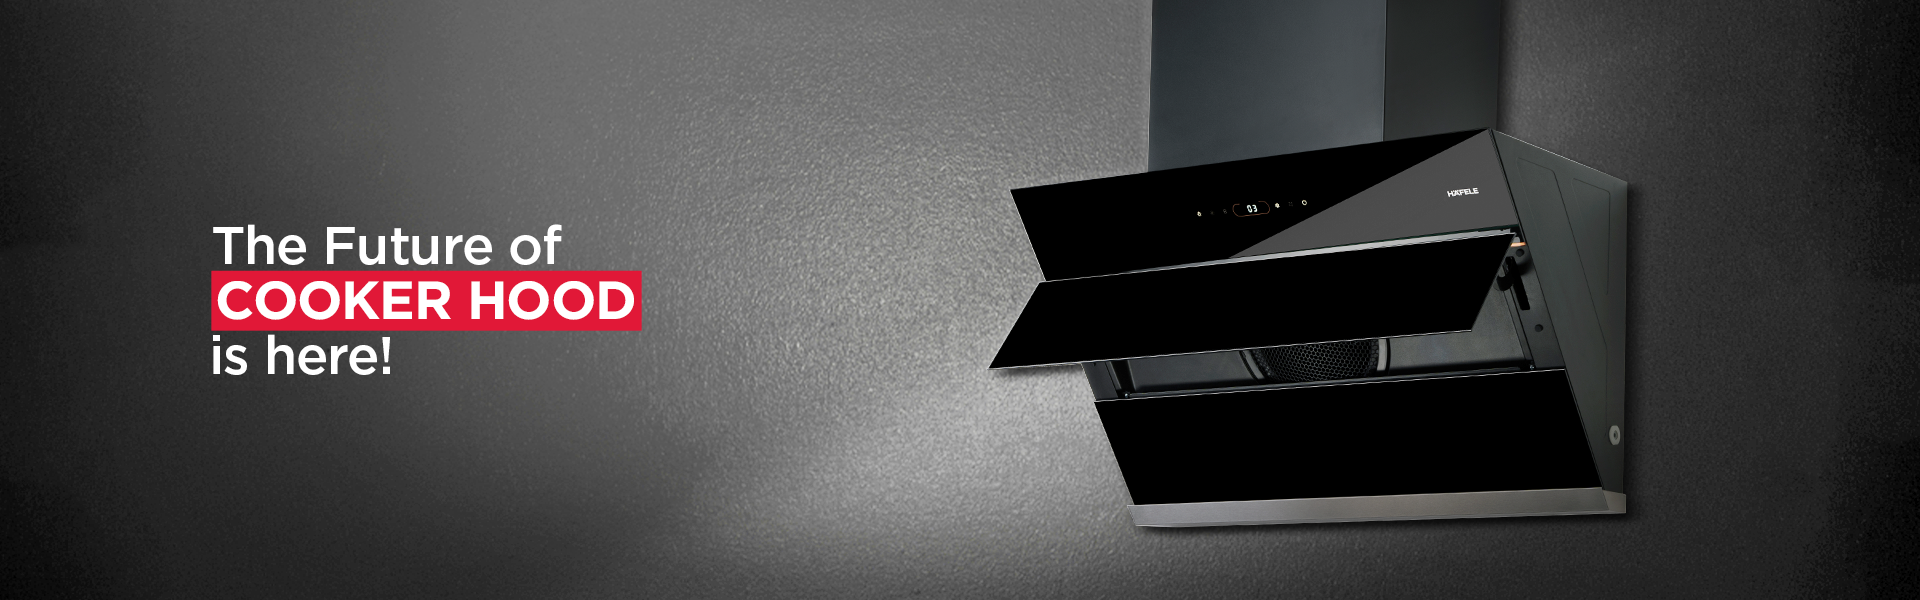 Hafele's filter-free cook hood with text The Future of Cooker Hood is Here